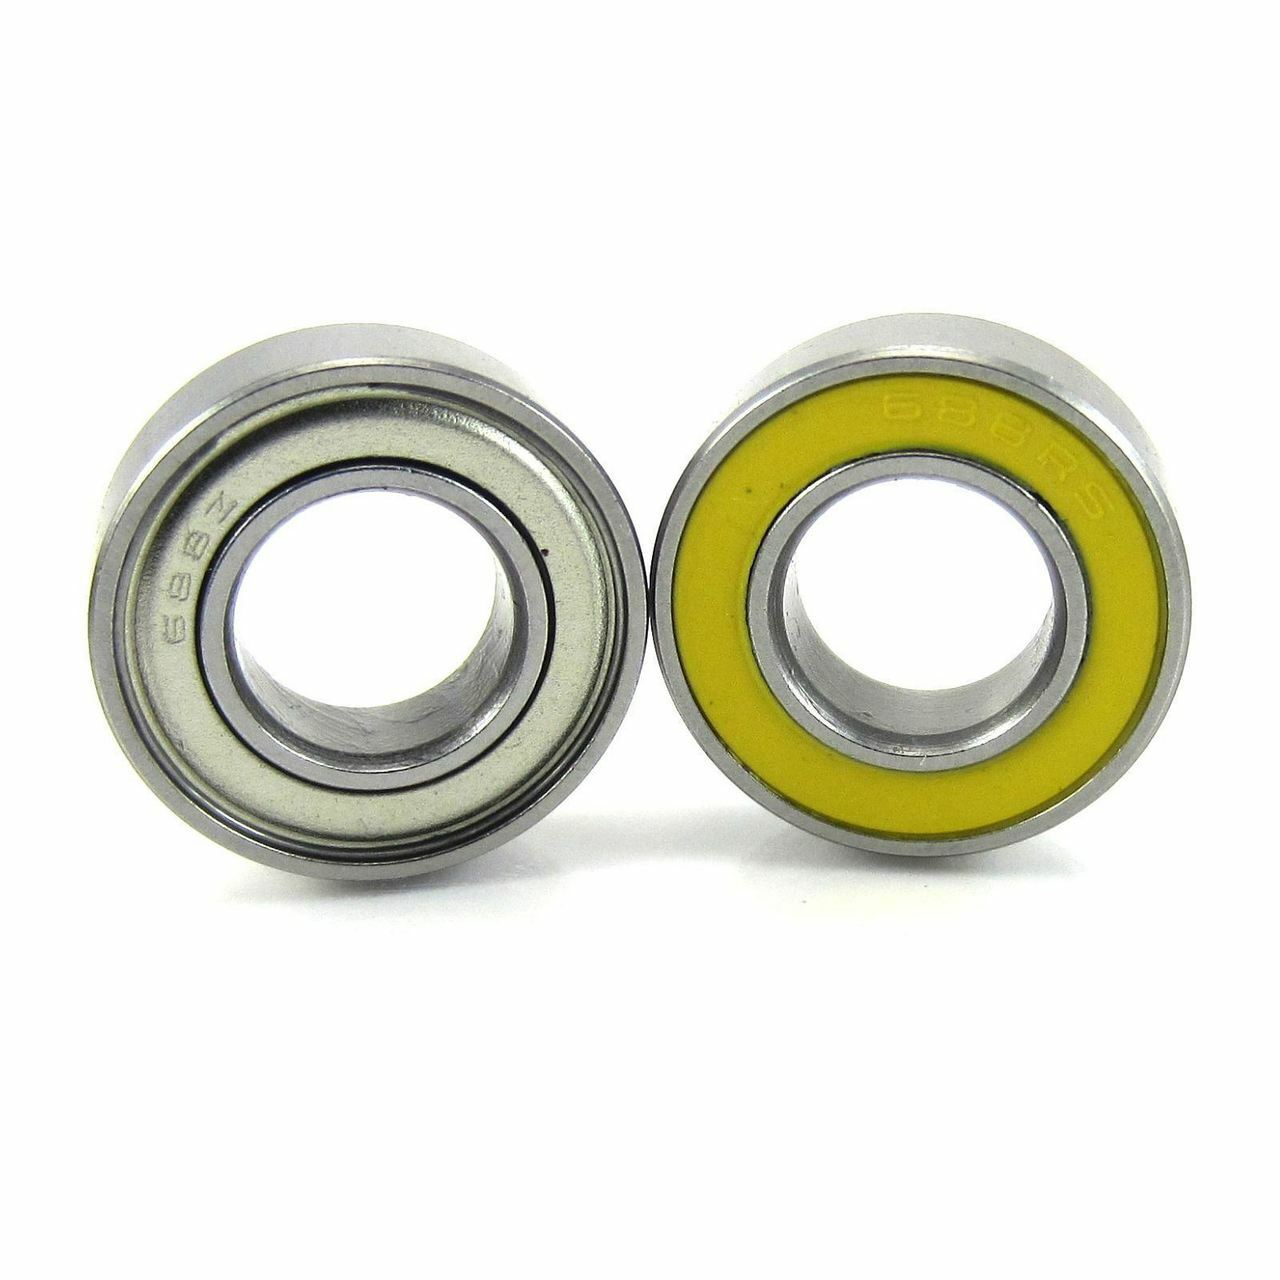 688-RZ 8x16x5mm Precision High Speed RC Car Ball Bearing, Chrome Steel (GCr15) with 1 Yellow Rubber Seal & 1 Metal Shield